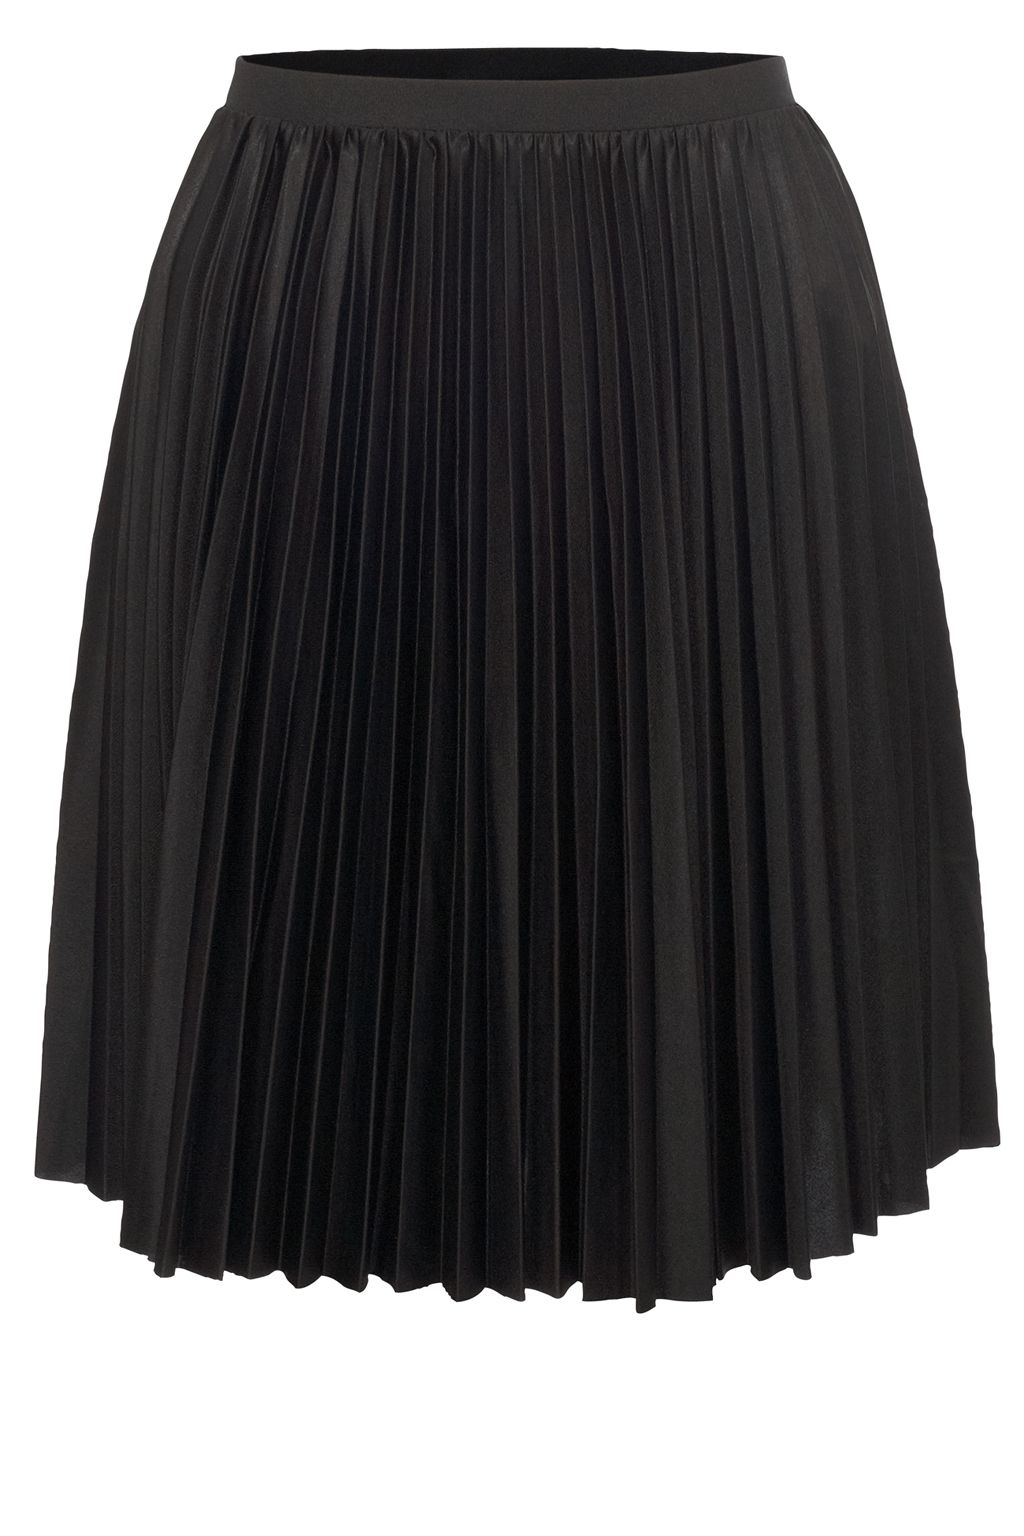 French Connection Ft Posh Pleat Skirt in Black | Lyst